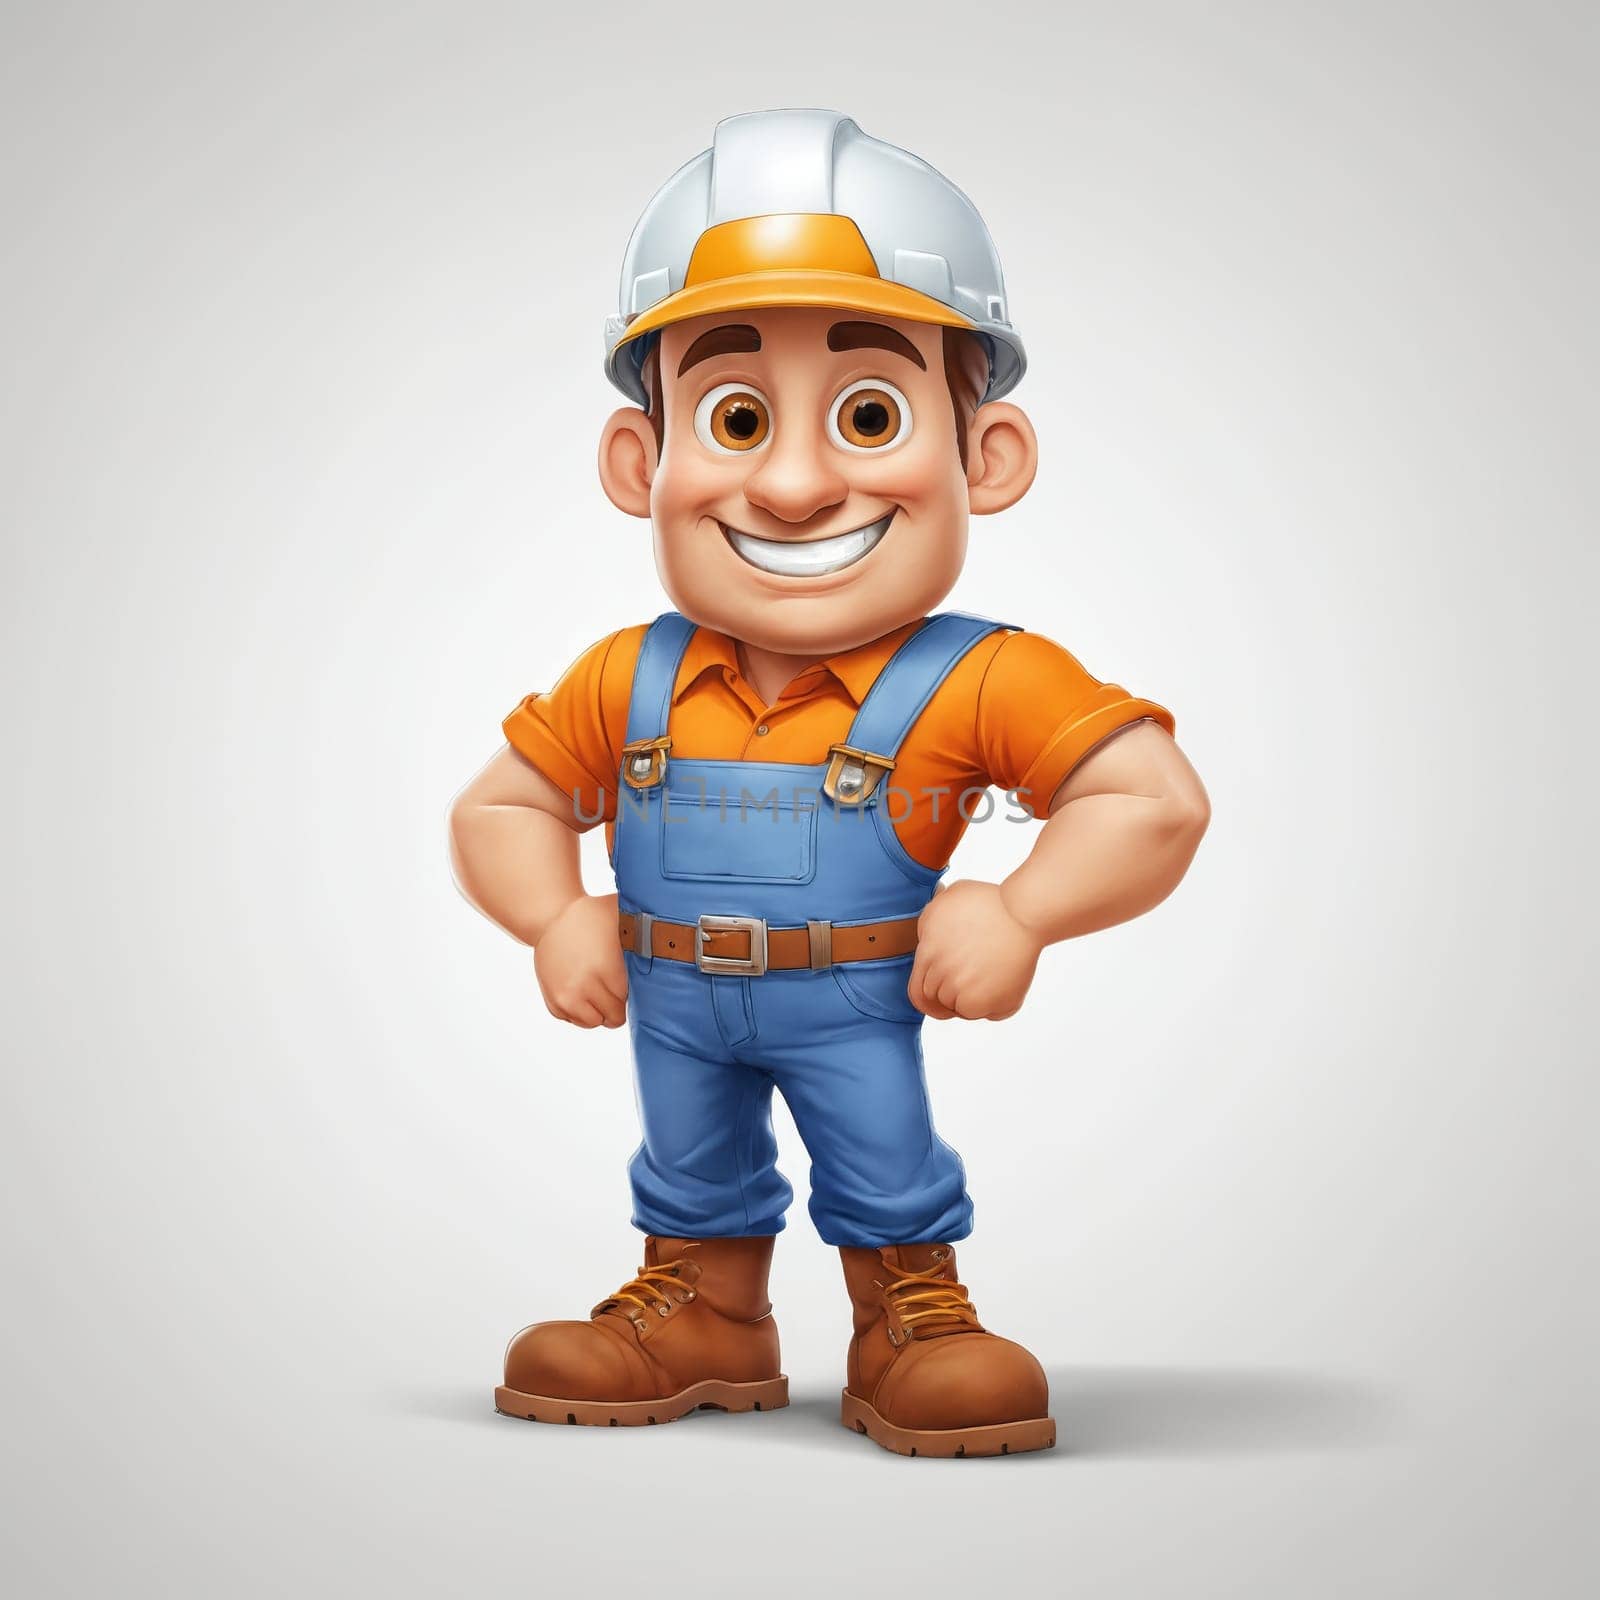 Construction worker in blue with a hard hat confidently stands equipped with a tool belt on a transparent background.